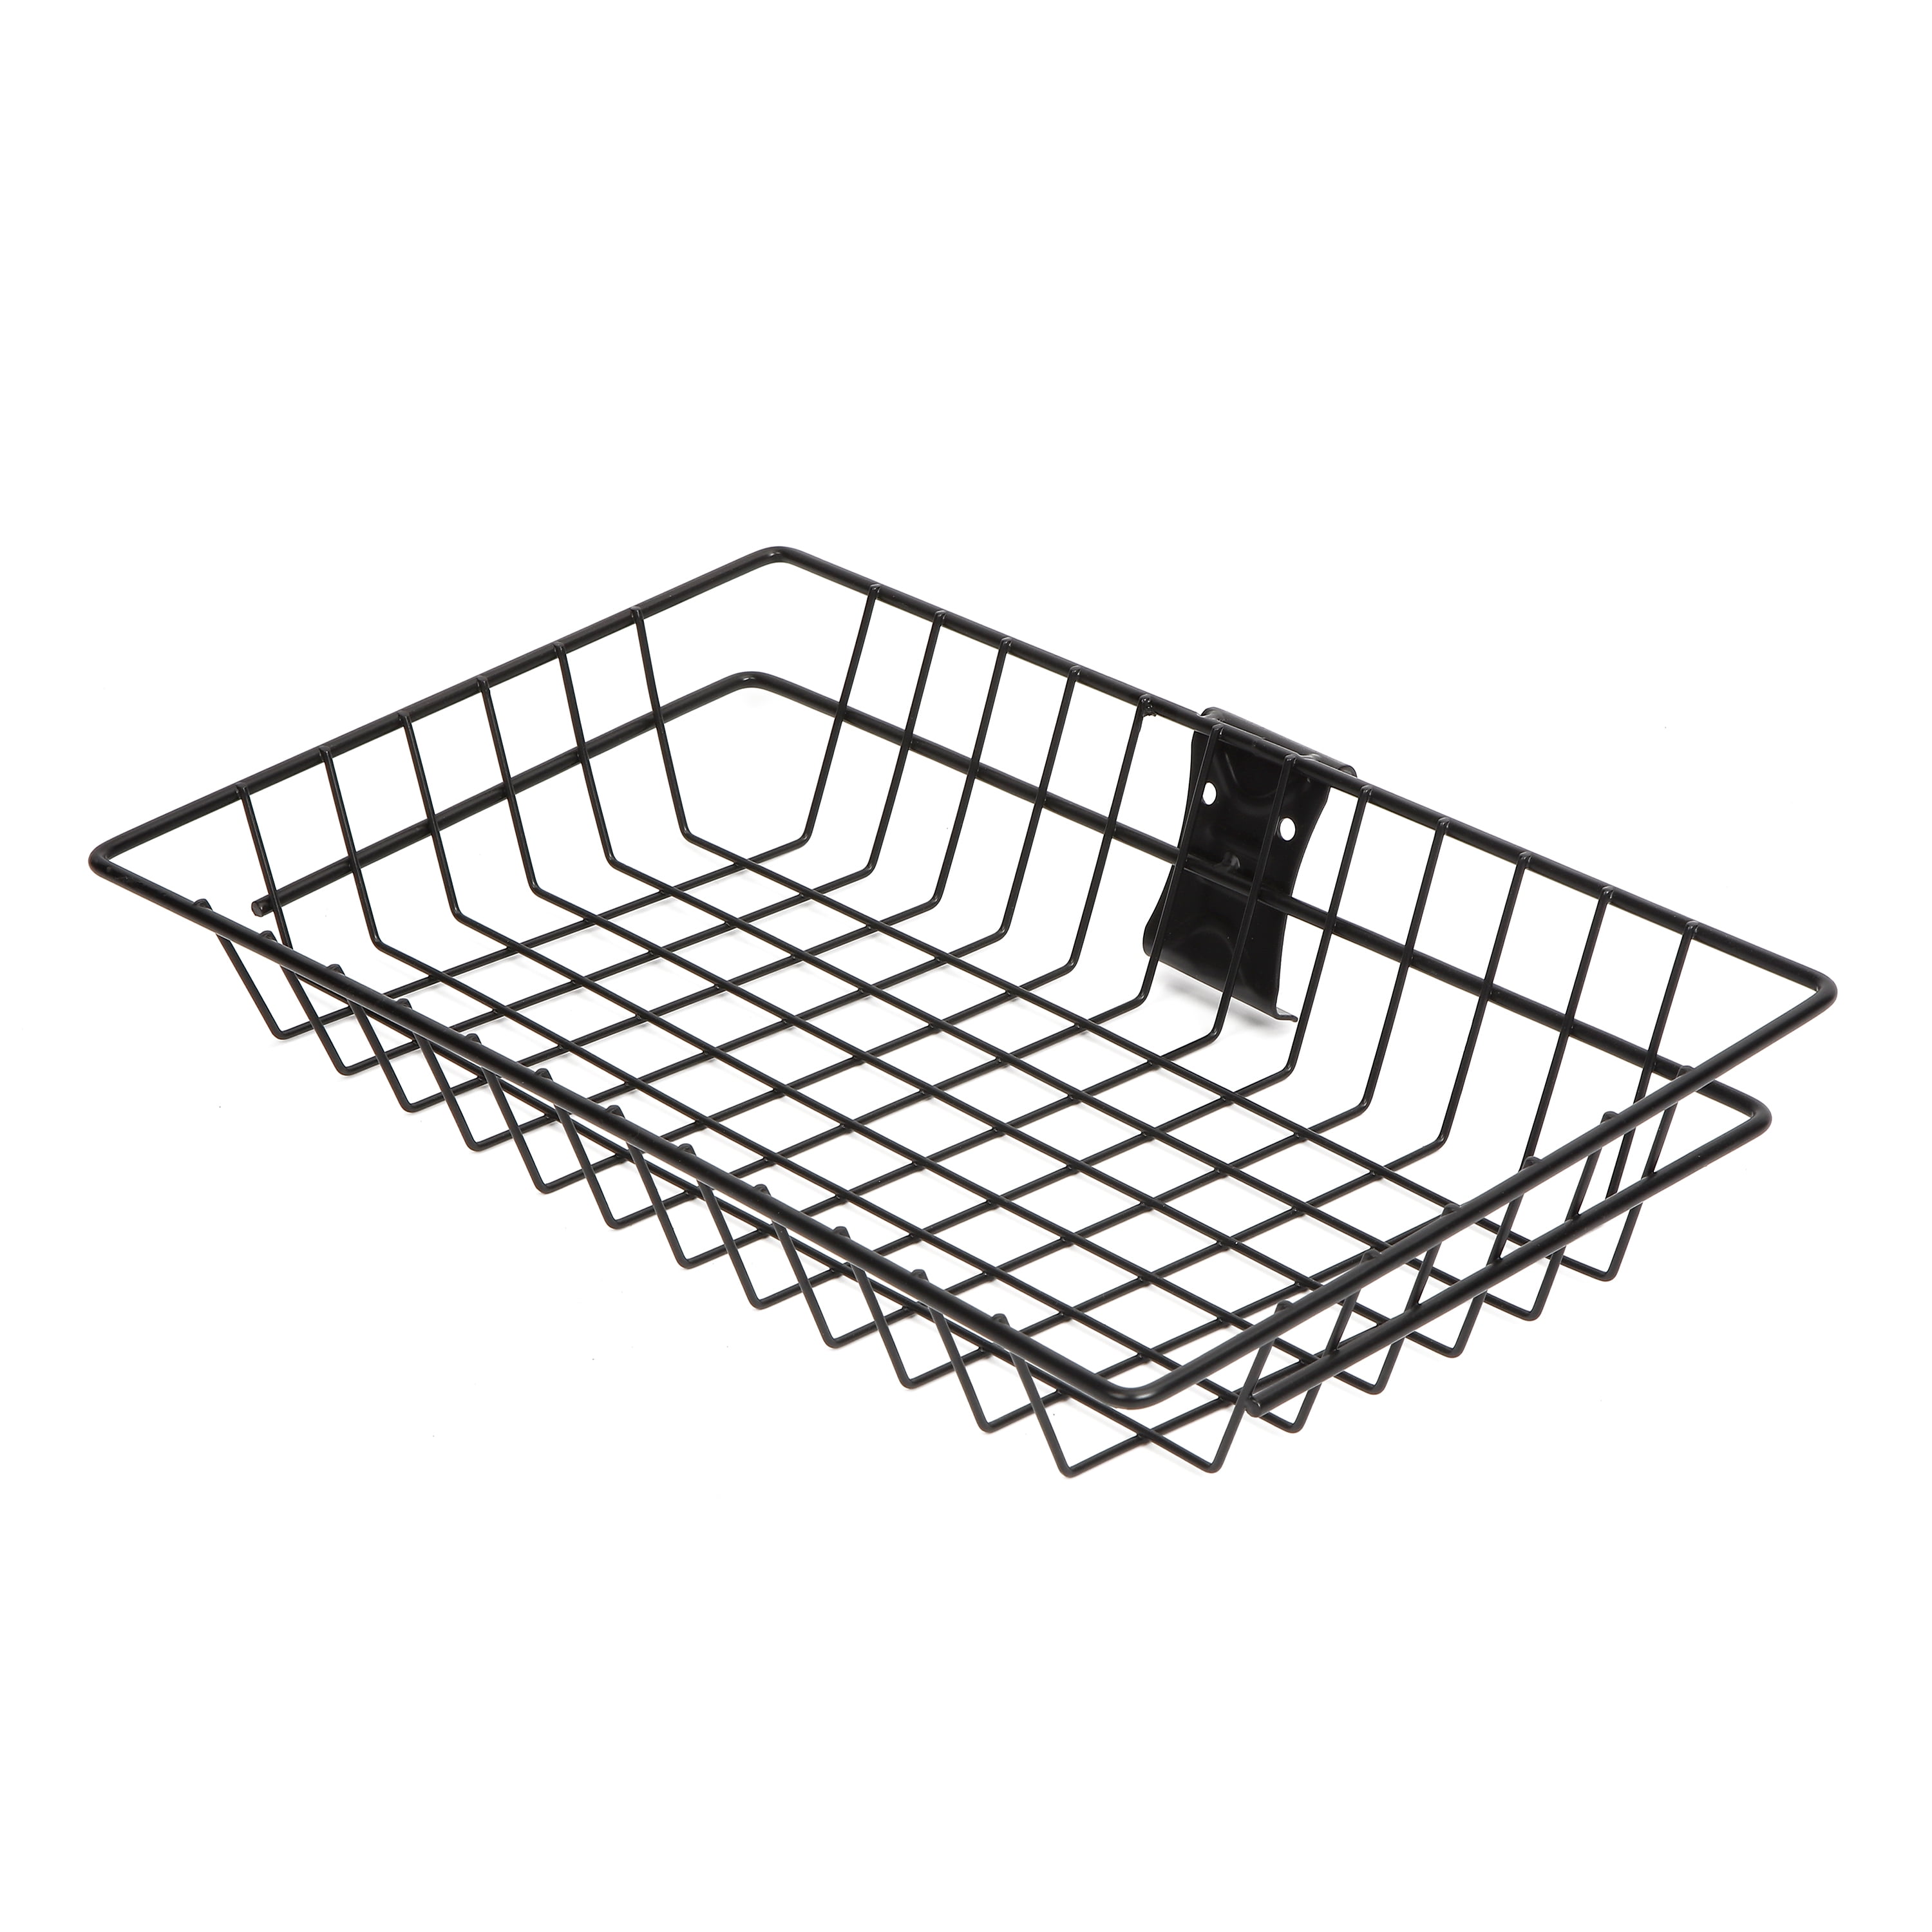 Hyper Tough 16-inch Metal Basket Caddy for Wall Mount and Snap Organizer Rail, Model 6706